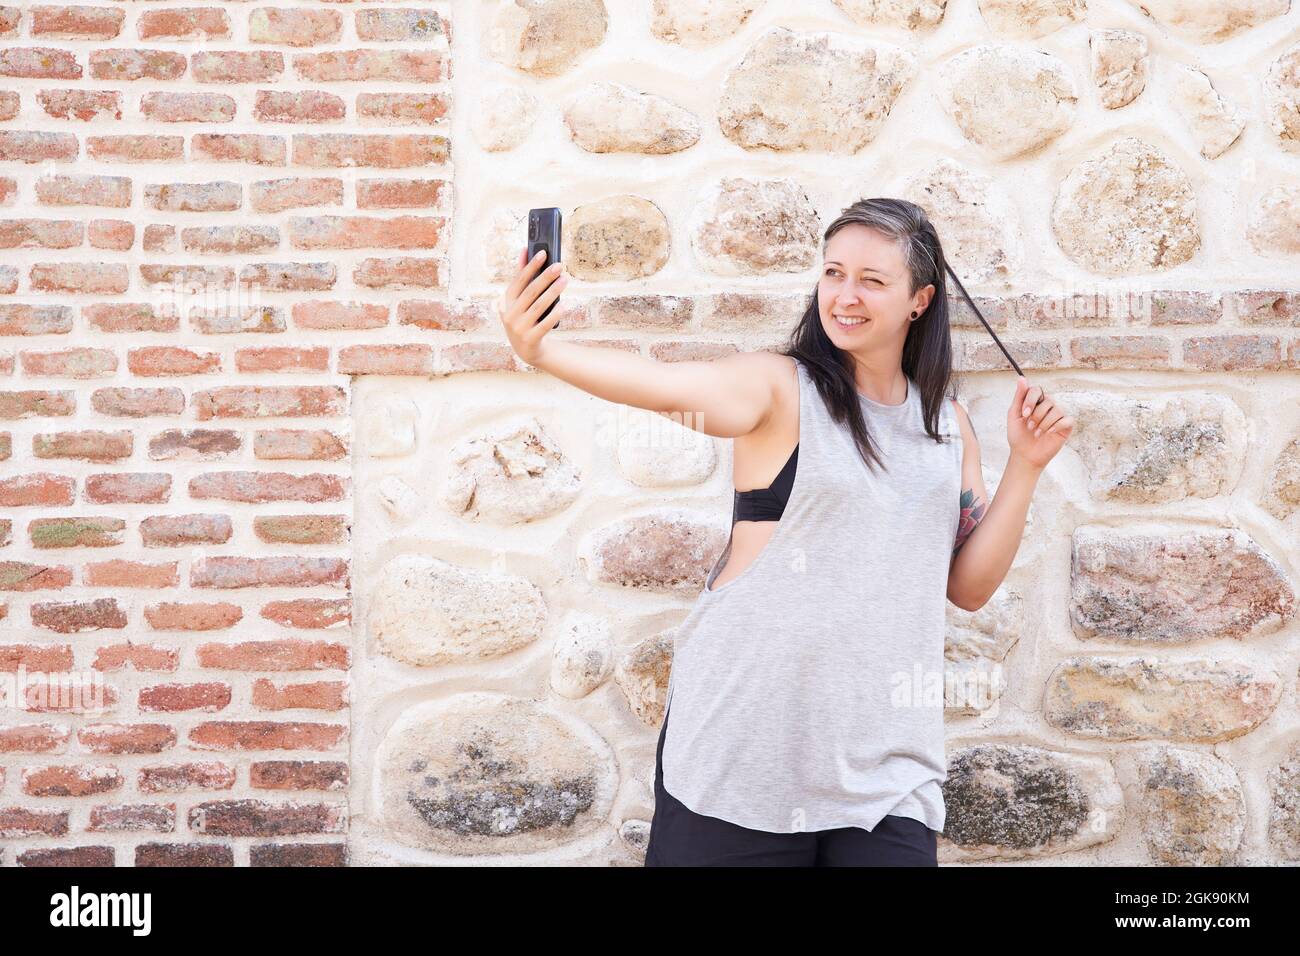 Portrait of a smiling woman taking a selfie with her smartphone outdoors while touching her hair. Stock Photo